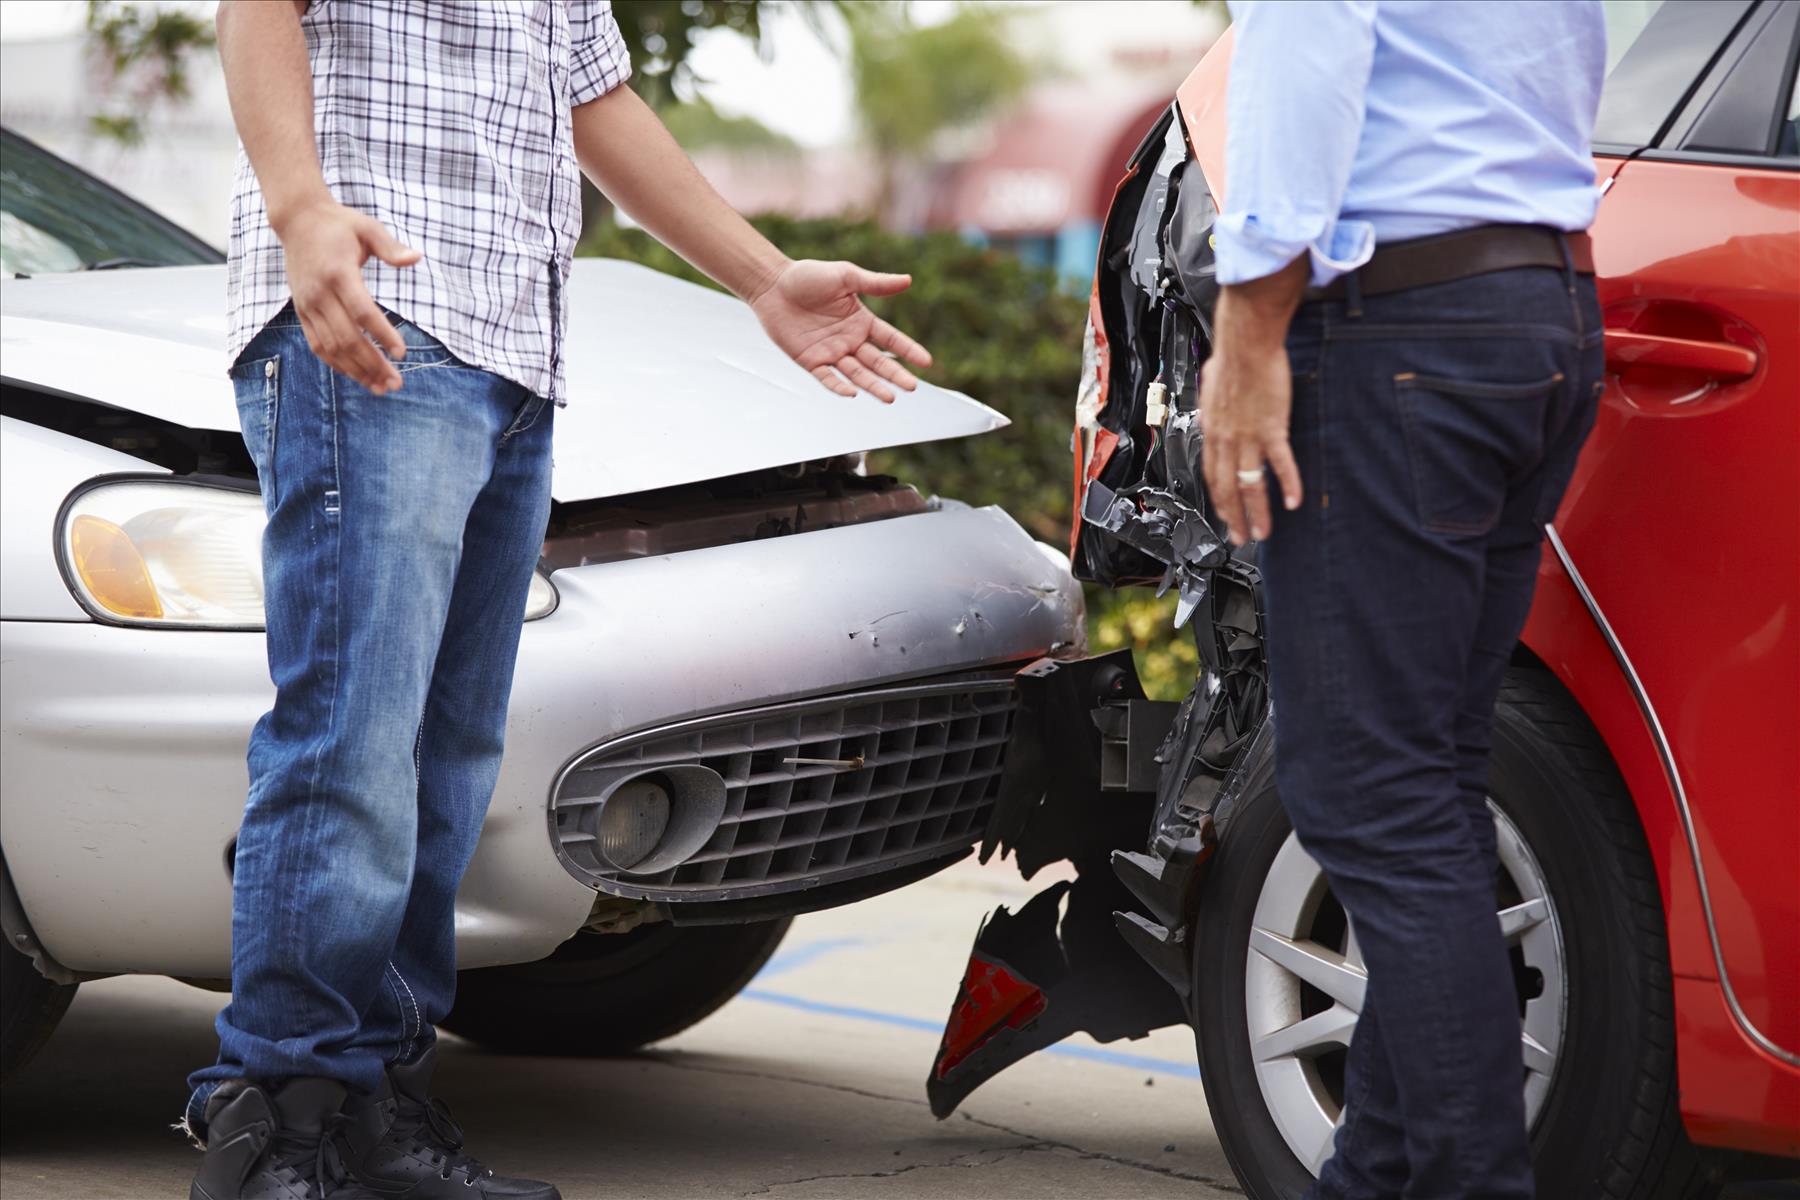 When Hit by a Car, Injuries and Compensation are Crucial